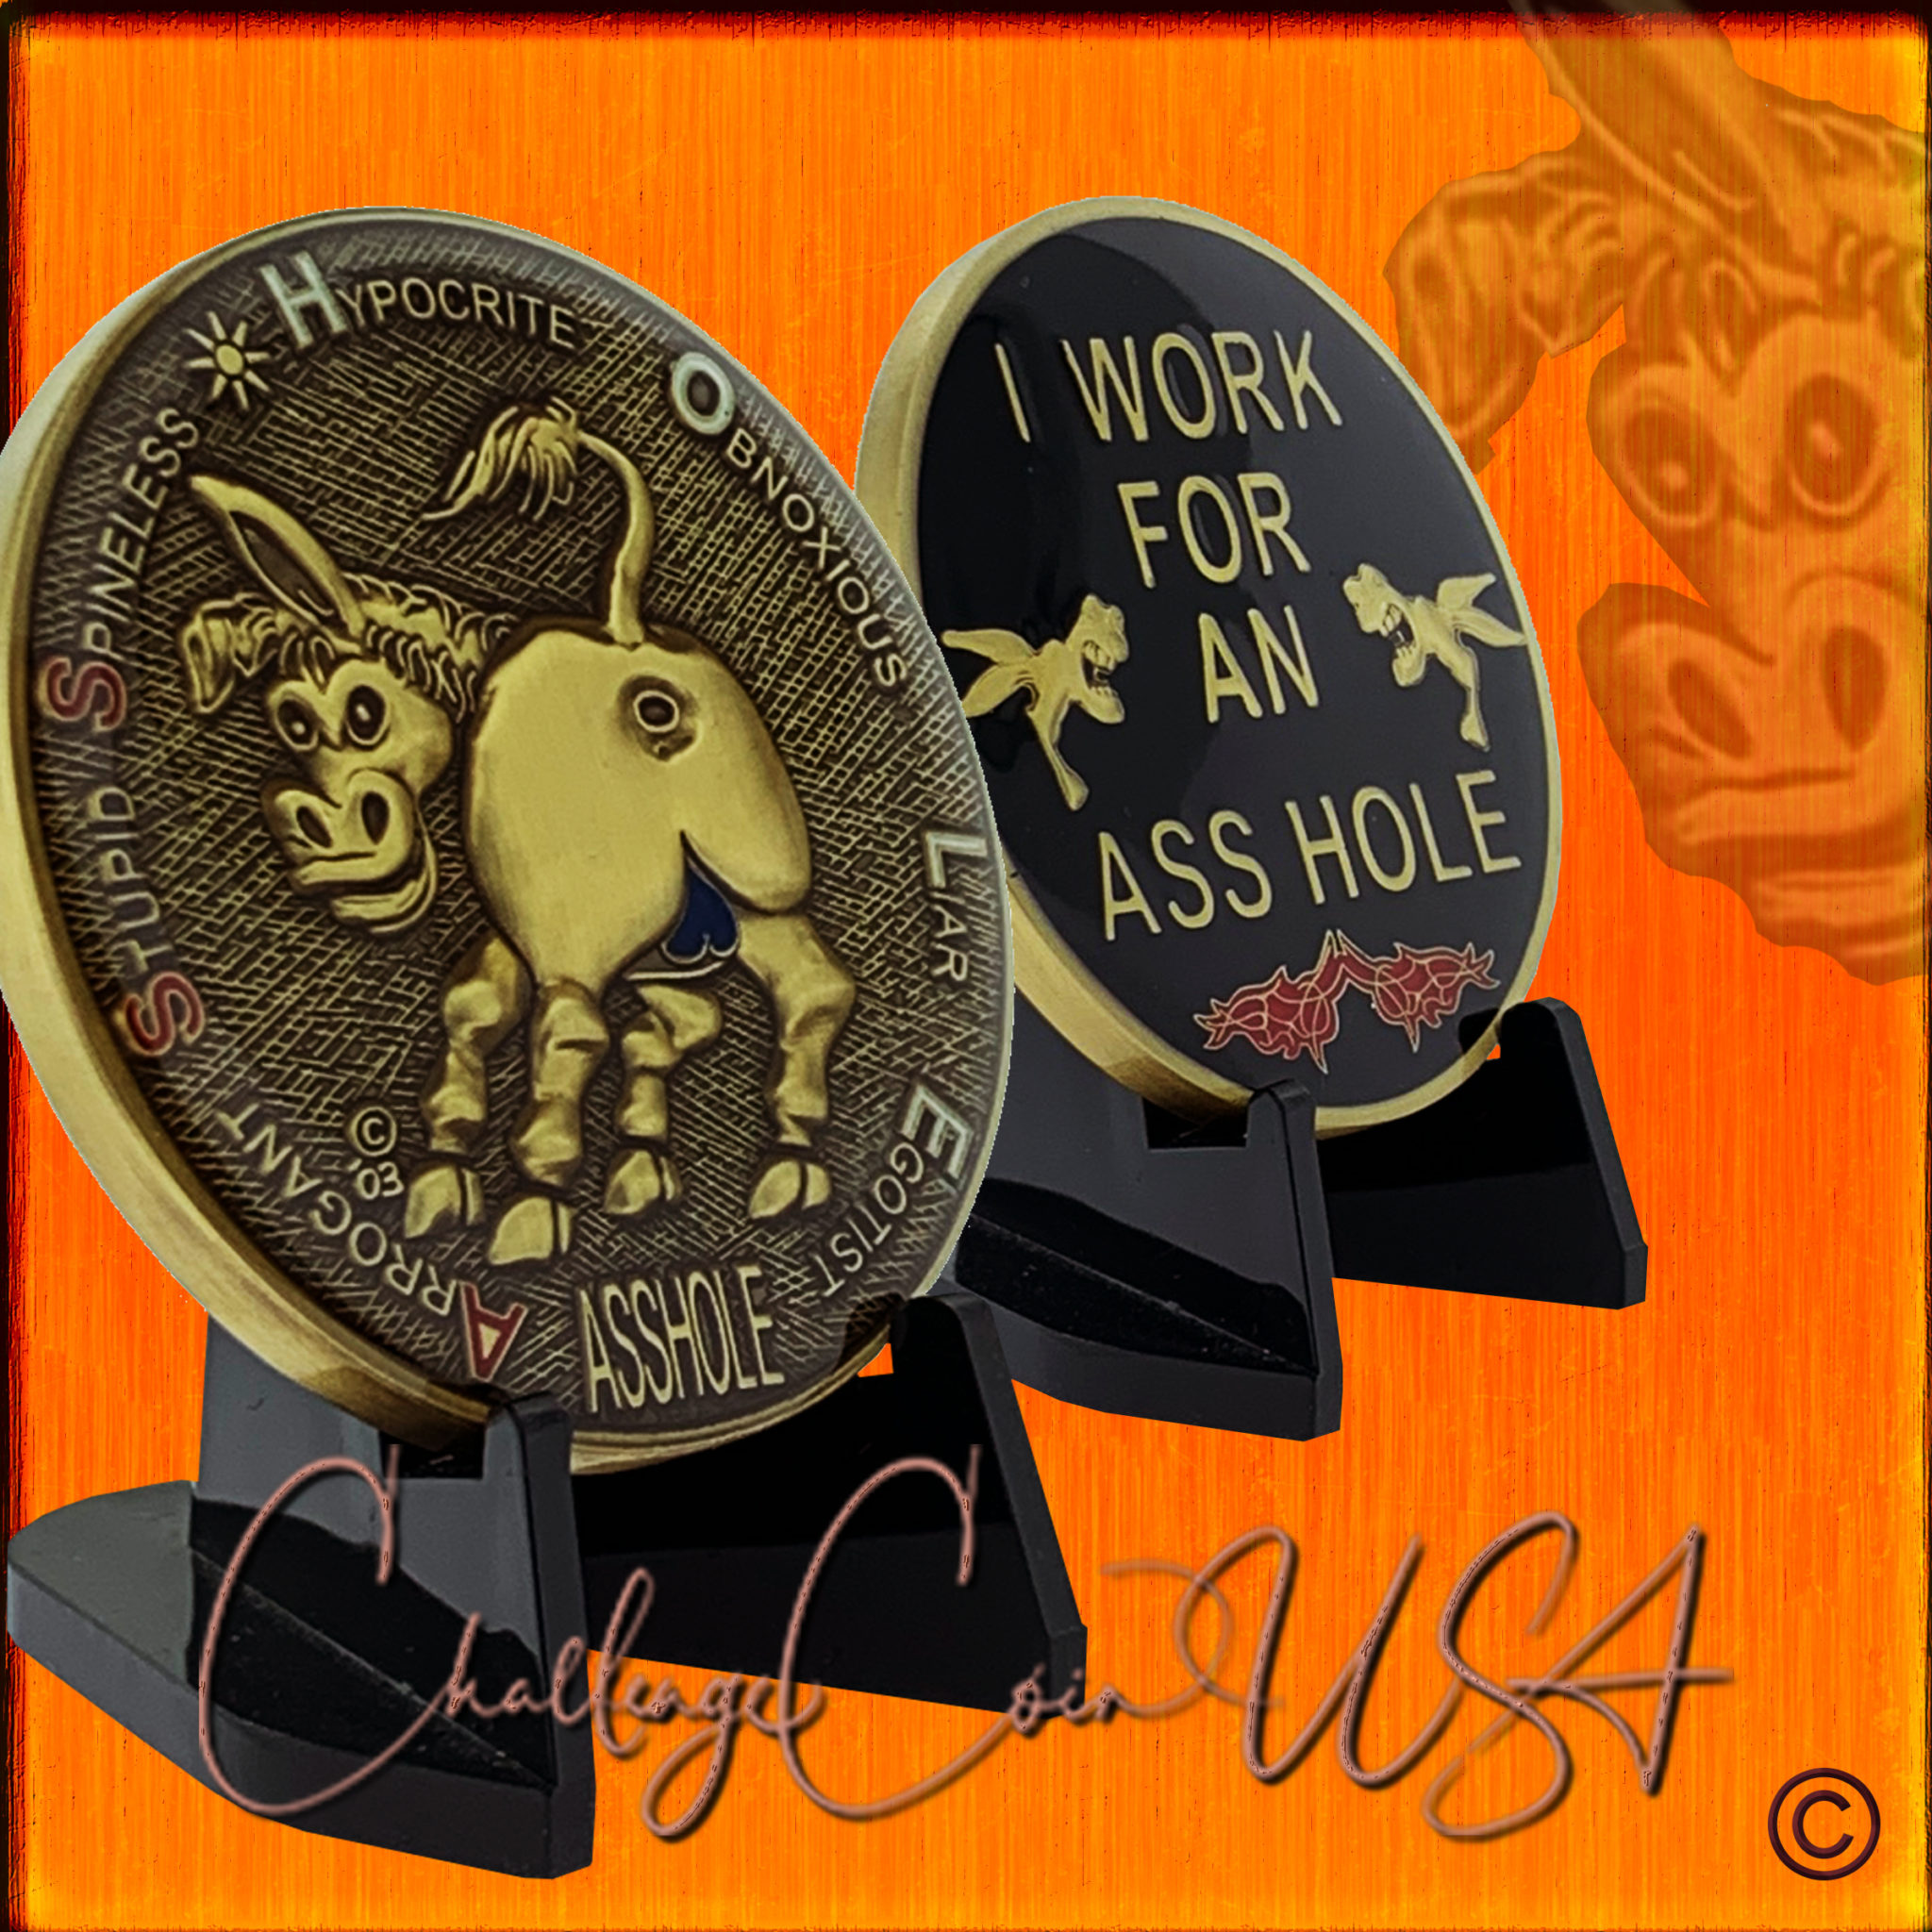 Challengecoinusa Asshole Challenge Coin A Perfect T For The Asshole In Your Life